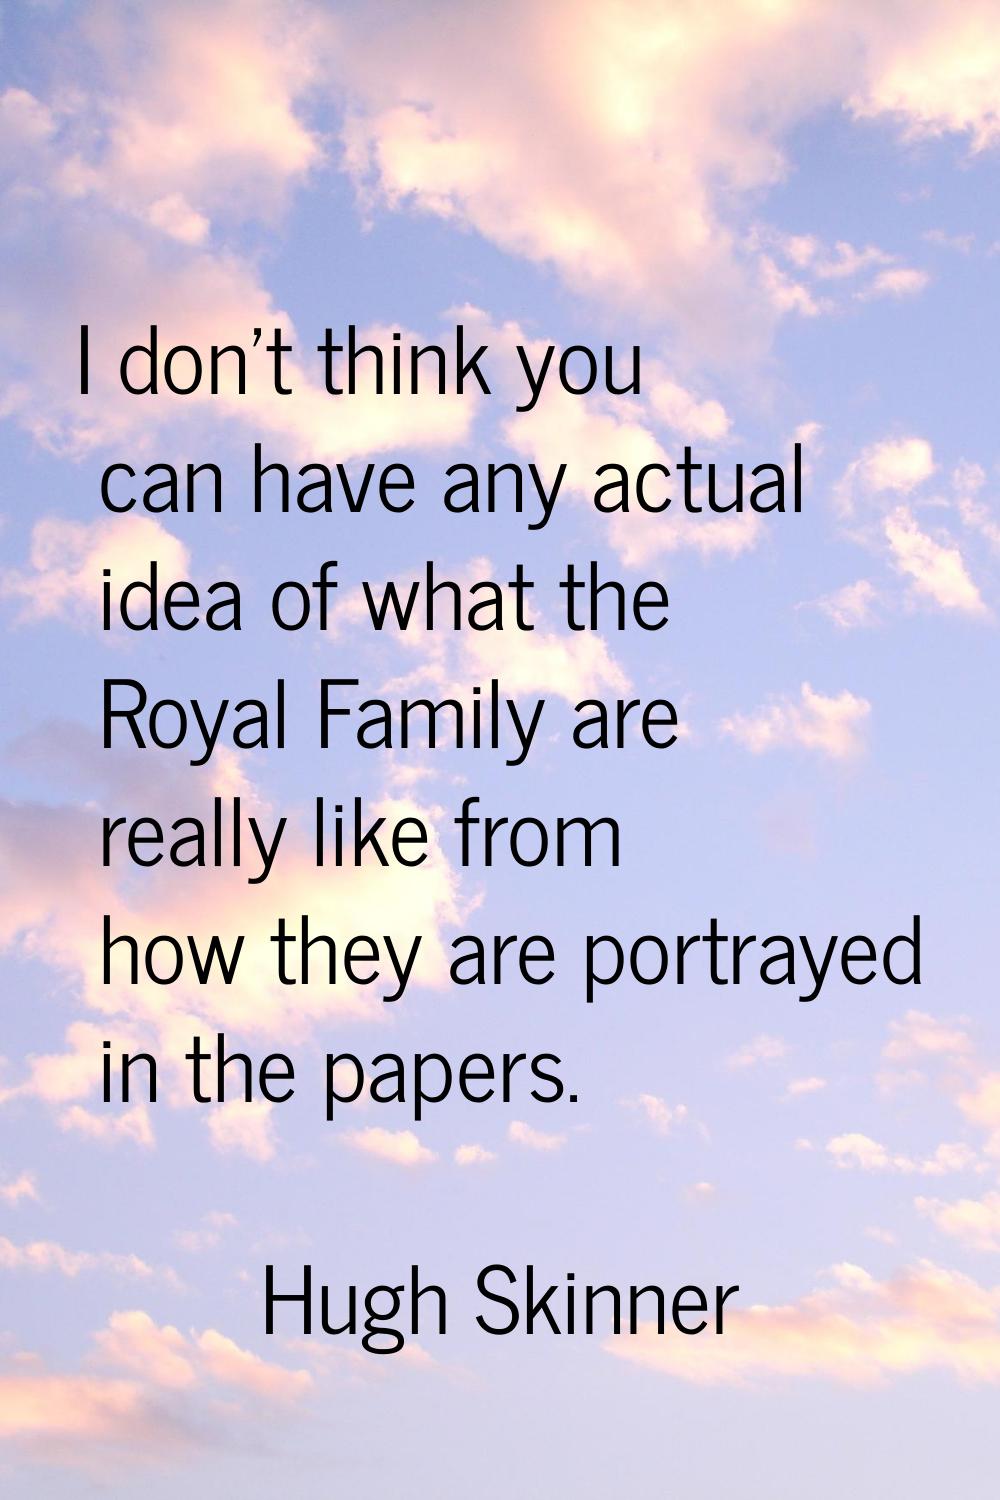 I don't think you can have any actual idea of what the Royal Family are really like from how they a